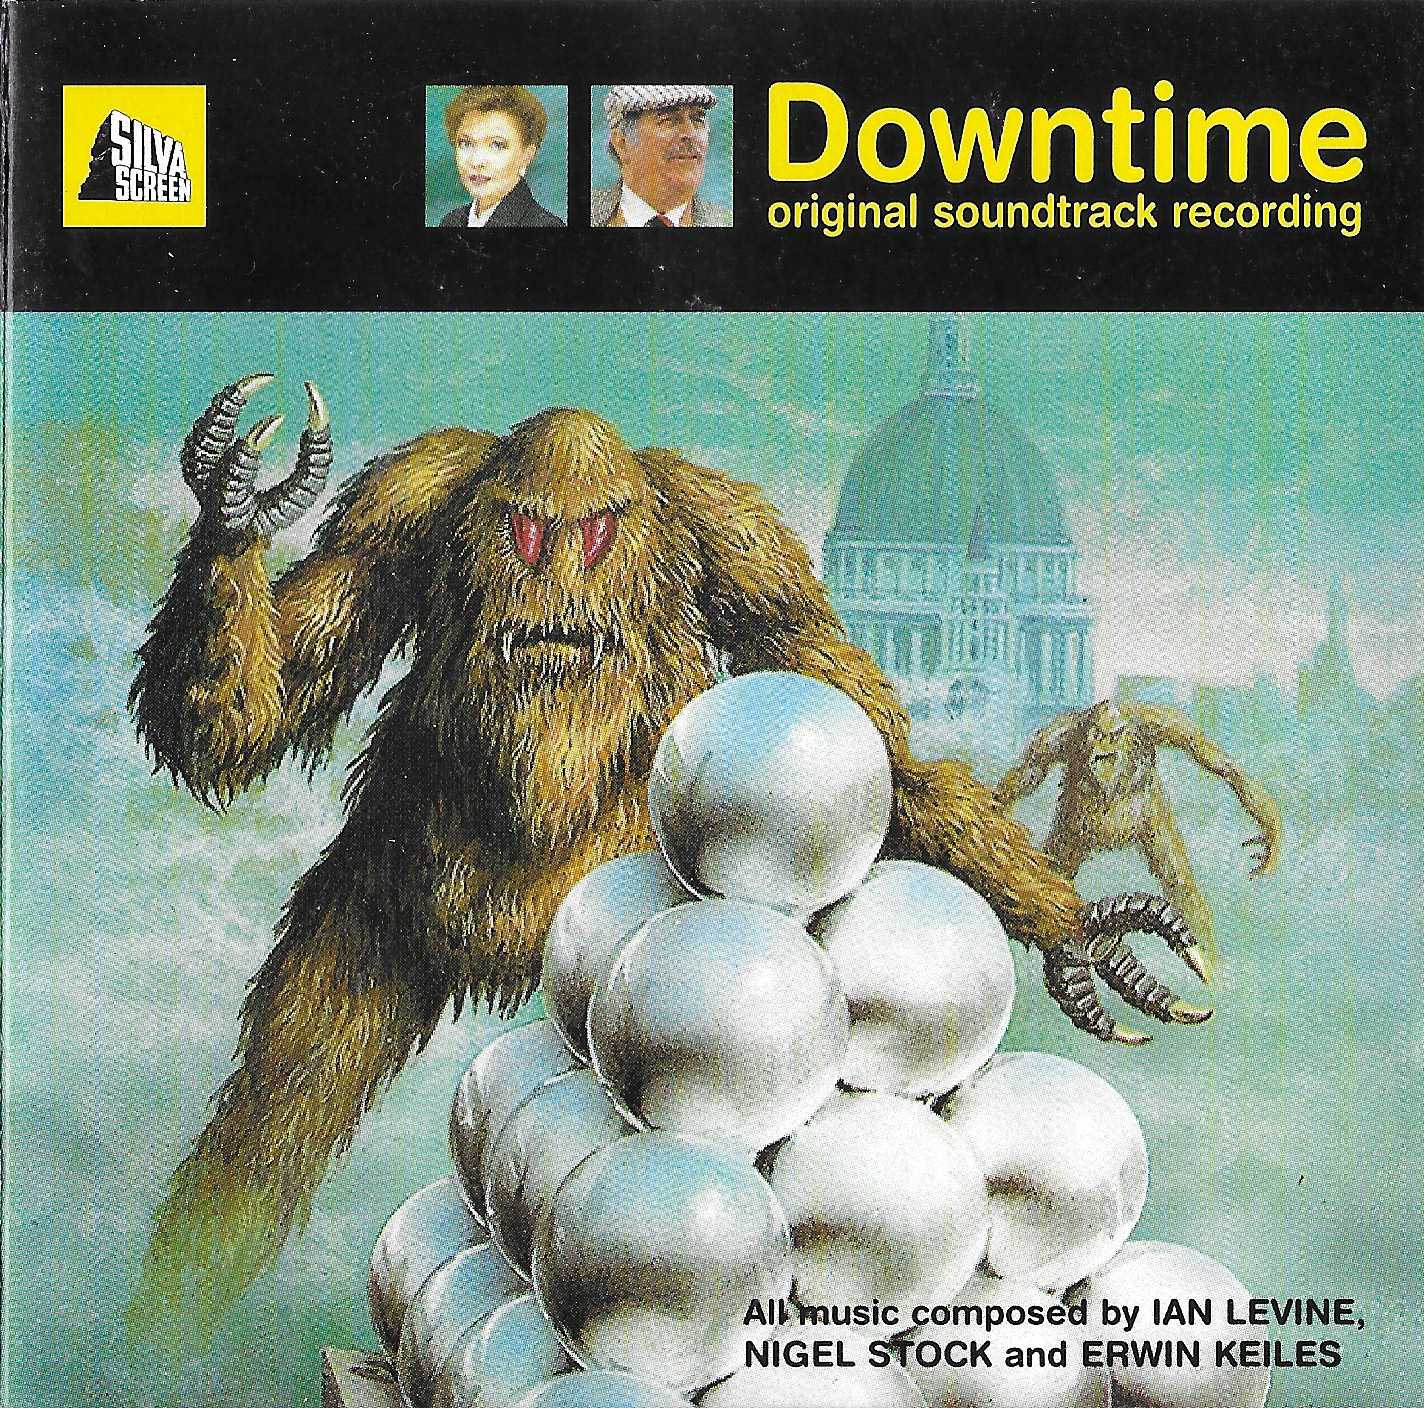 Picture of FILMCD 717 Downtime by artist Ian Levine / Nigel Stock / Erwin Keiles from the BBC cds - Records and Tapes library